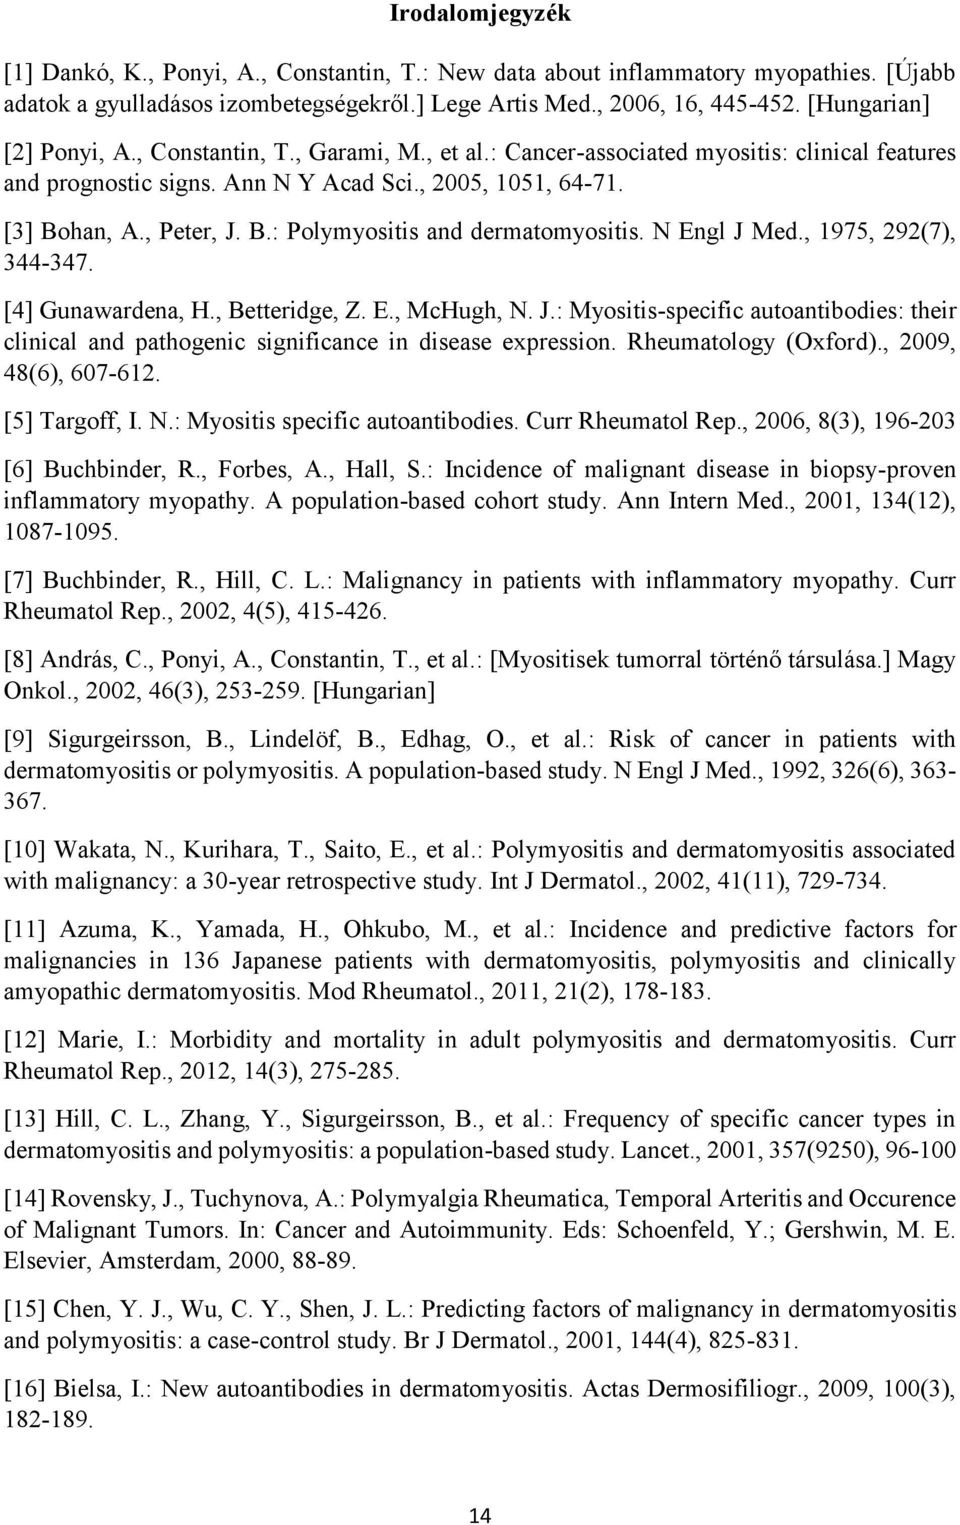 han, A., Peter, J. B.: Polymyositis and dermatomyositis. N Engl J Med., 1975, 292(7), 344-347. [4] Gunawardena, H., Betteridge, Z. E., McHugh, N. J.: Myositis-specific autoantibodies: their clinical and pathogenic significance in disease expression.